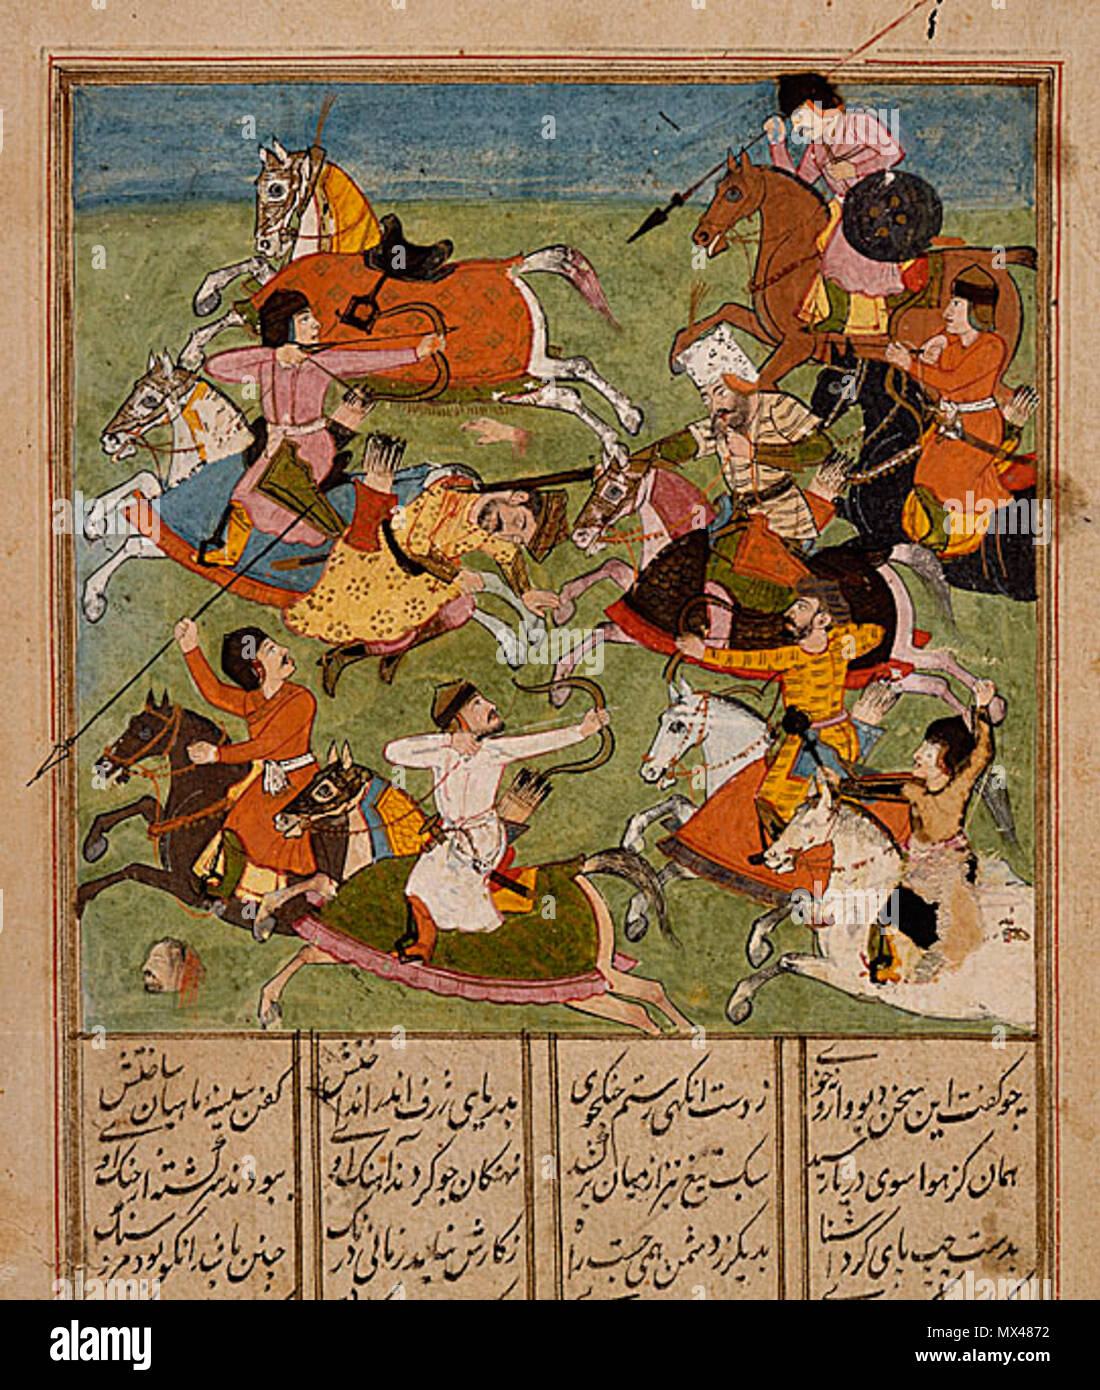 . Battle Scene from an early 17th century Shahnama Battle Scene and Text (recto), Text (verso), Folio from a Shahnama (Book of Kings), early 17th century. Opaque watercolor, gold, silver, and ink on paper, Sheet: 9 7/8 x 6 3/8 in. (25.08 x 16.19 cm); Image: 4 1/4 x 4 3/8 in. (10.8 x 11.11 cm). Source: Los Angeles County Museum of Art. 17th century. Unknown 76 Battle Scene from an early 17th century Shahnama Stock Photo